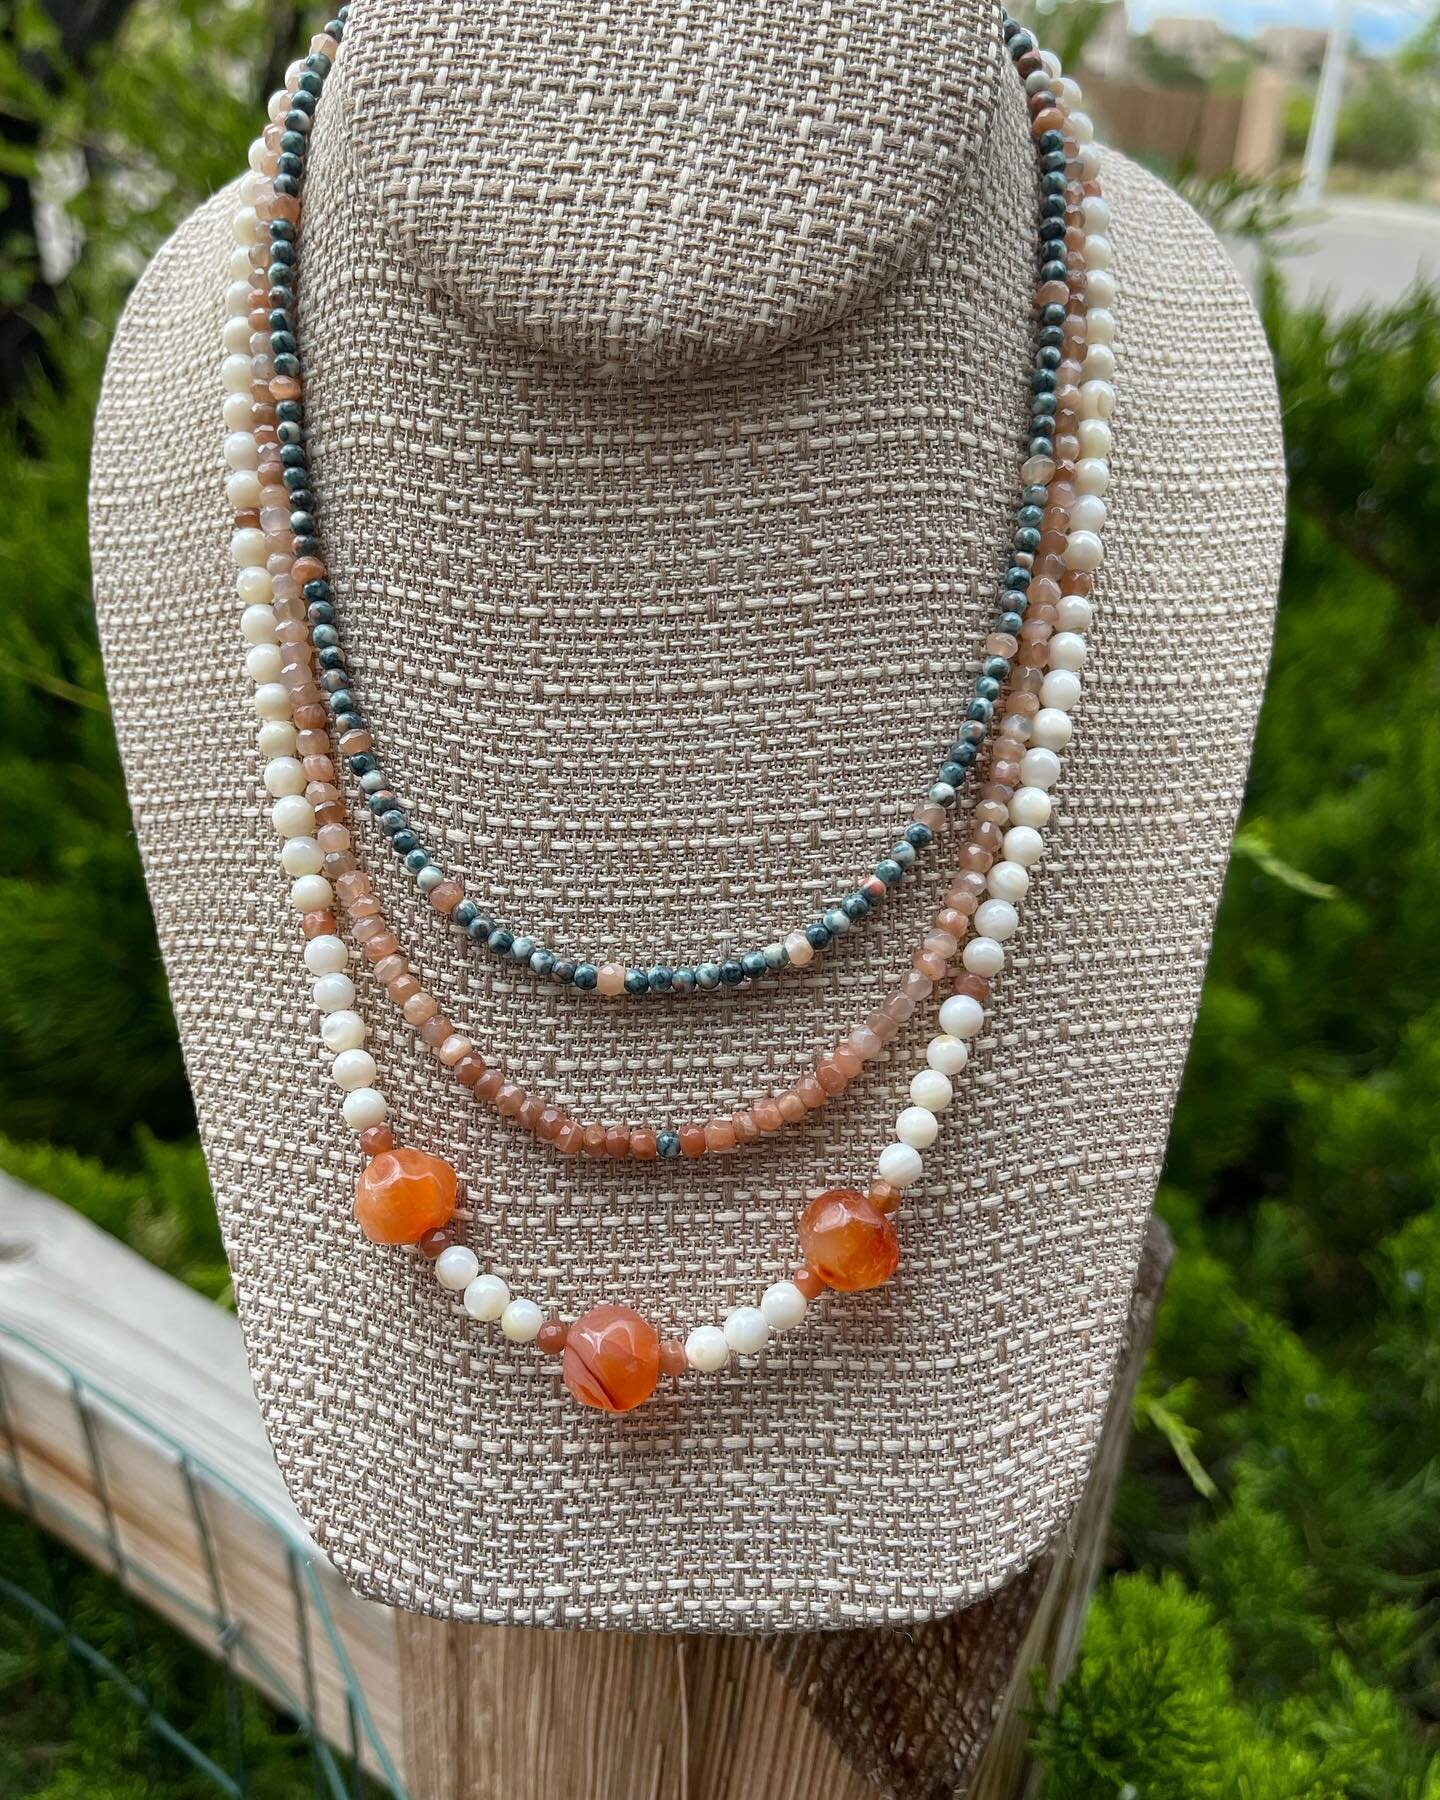 Summer Hues is my newest 3 strand necklace. I used orange Sodalite, Mother of Pearl rounds, 3 large Carnelian beads and faceted Peach Moonstone. It&rsquo;s completed with a silver filled toggle clasp. The short strand is 15 3/4&rdquo; and the longest